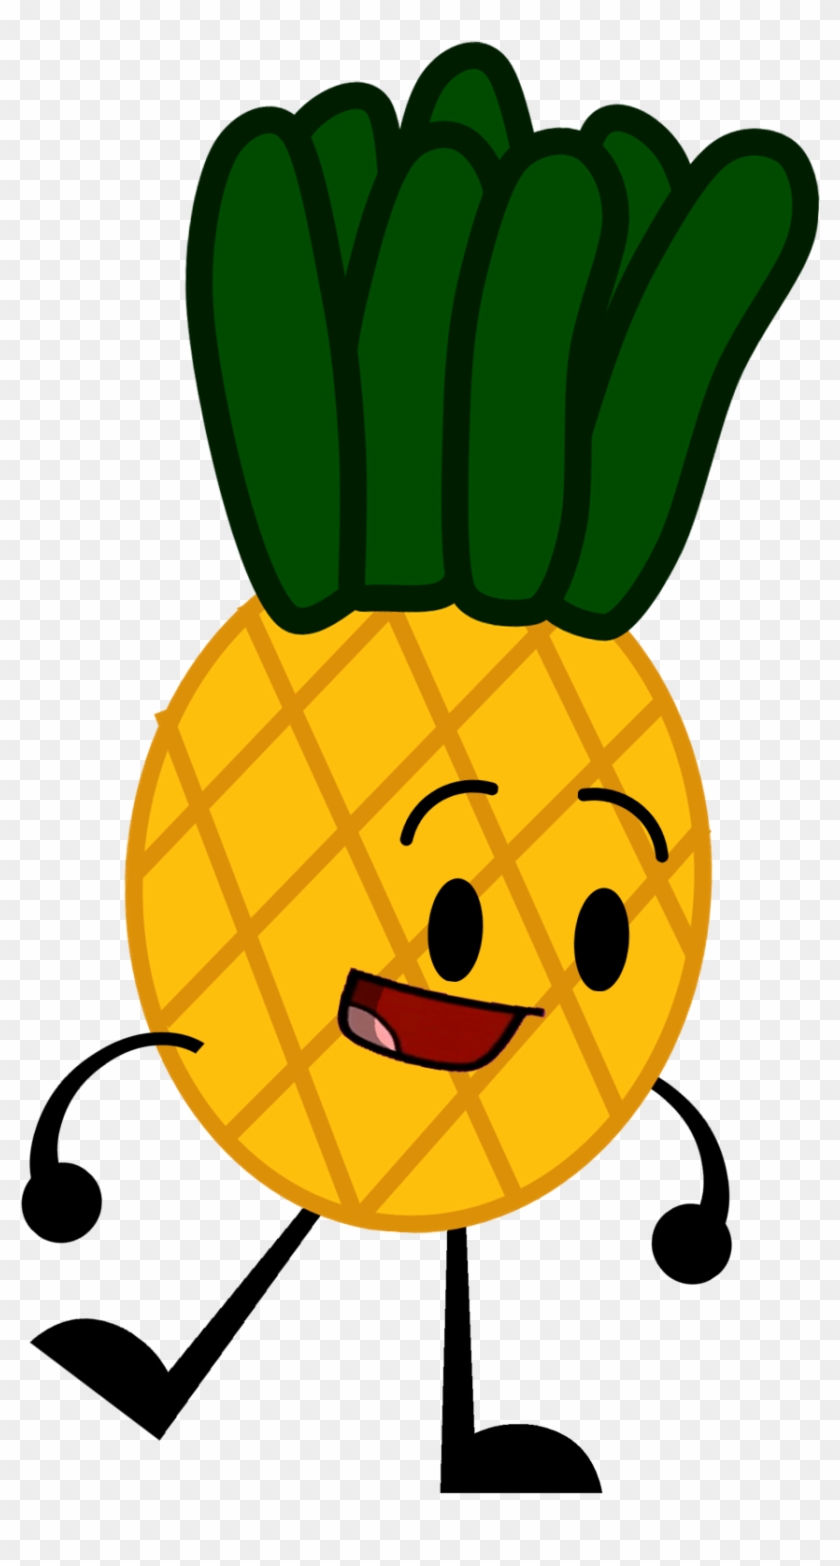 Pineapple Clipart Object - Brawl Of The Objects Pineapple #385239